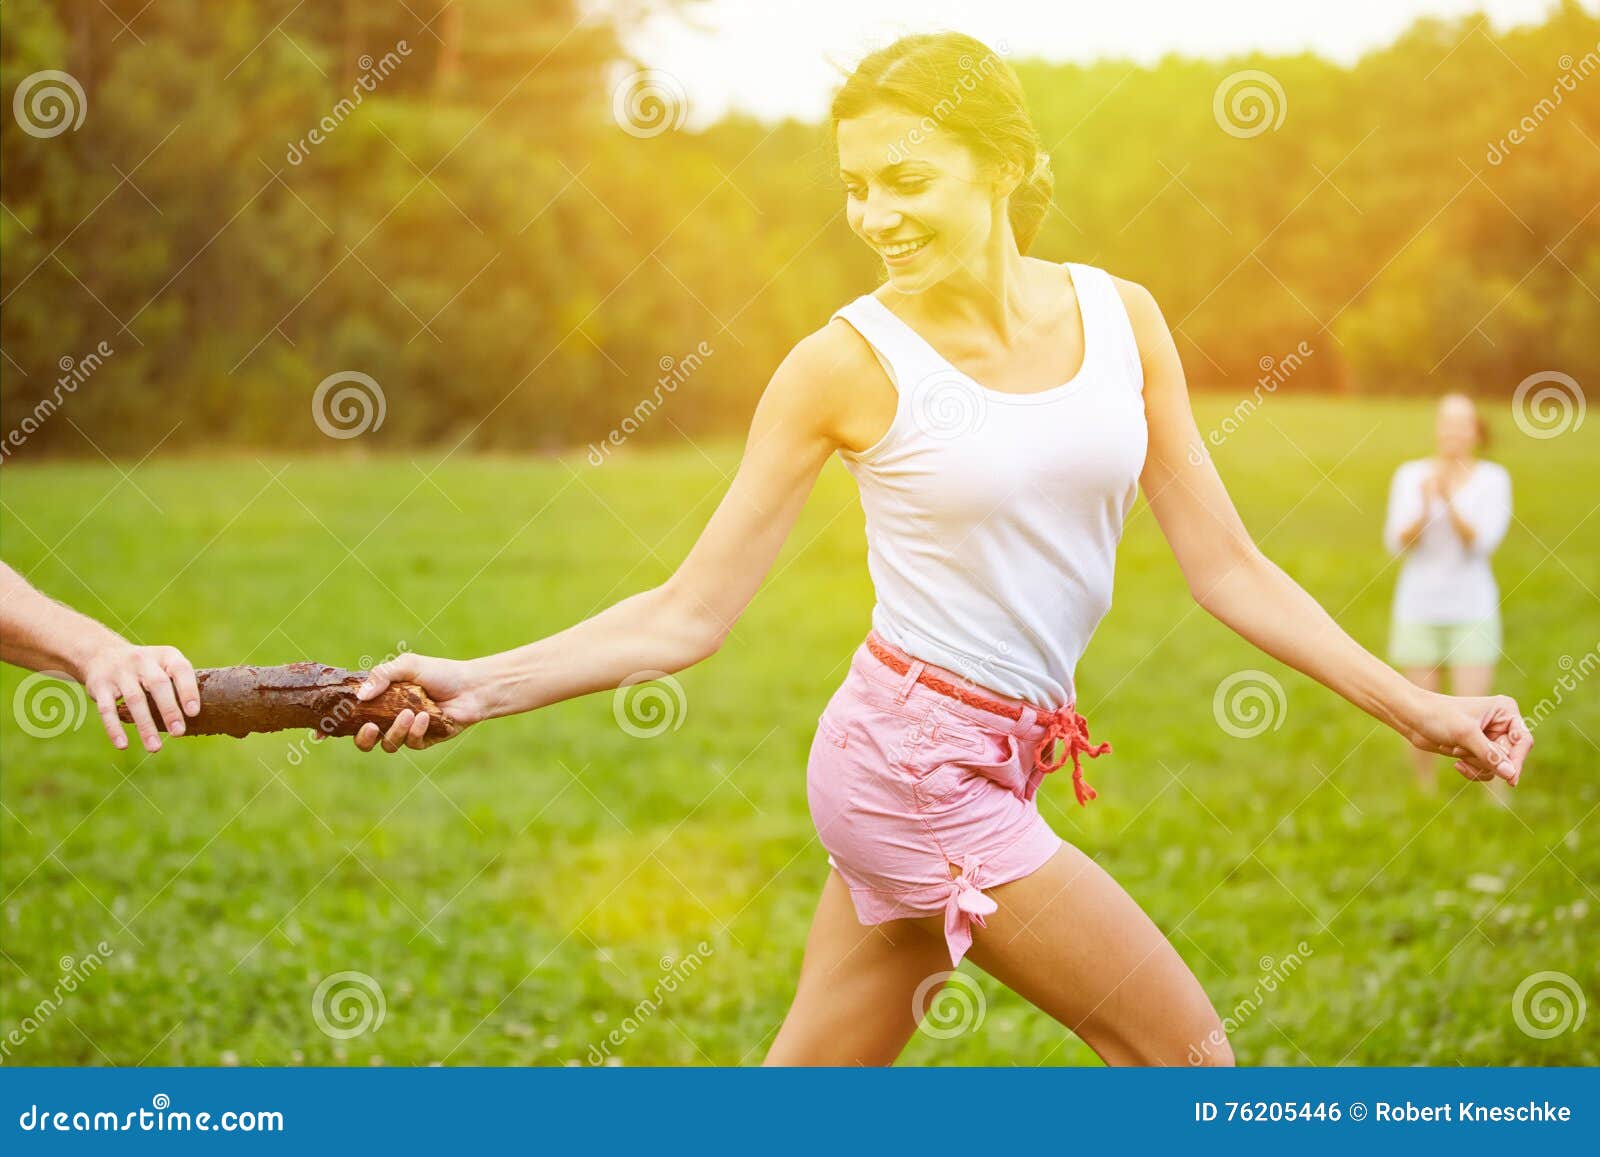 Cooperation at Relay Race in Summer Stock Photo - Image of deliver ...